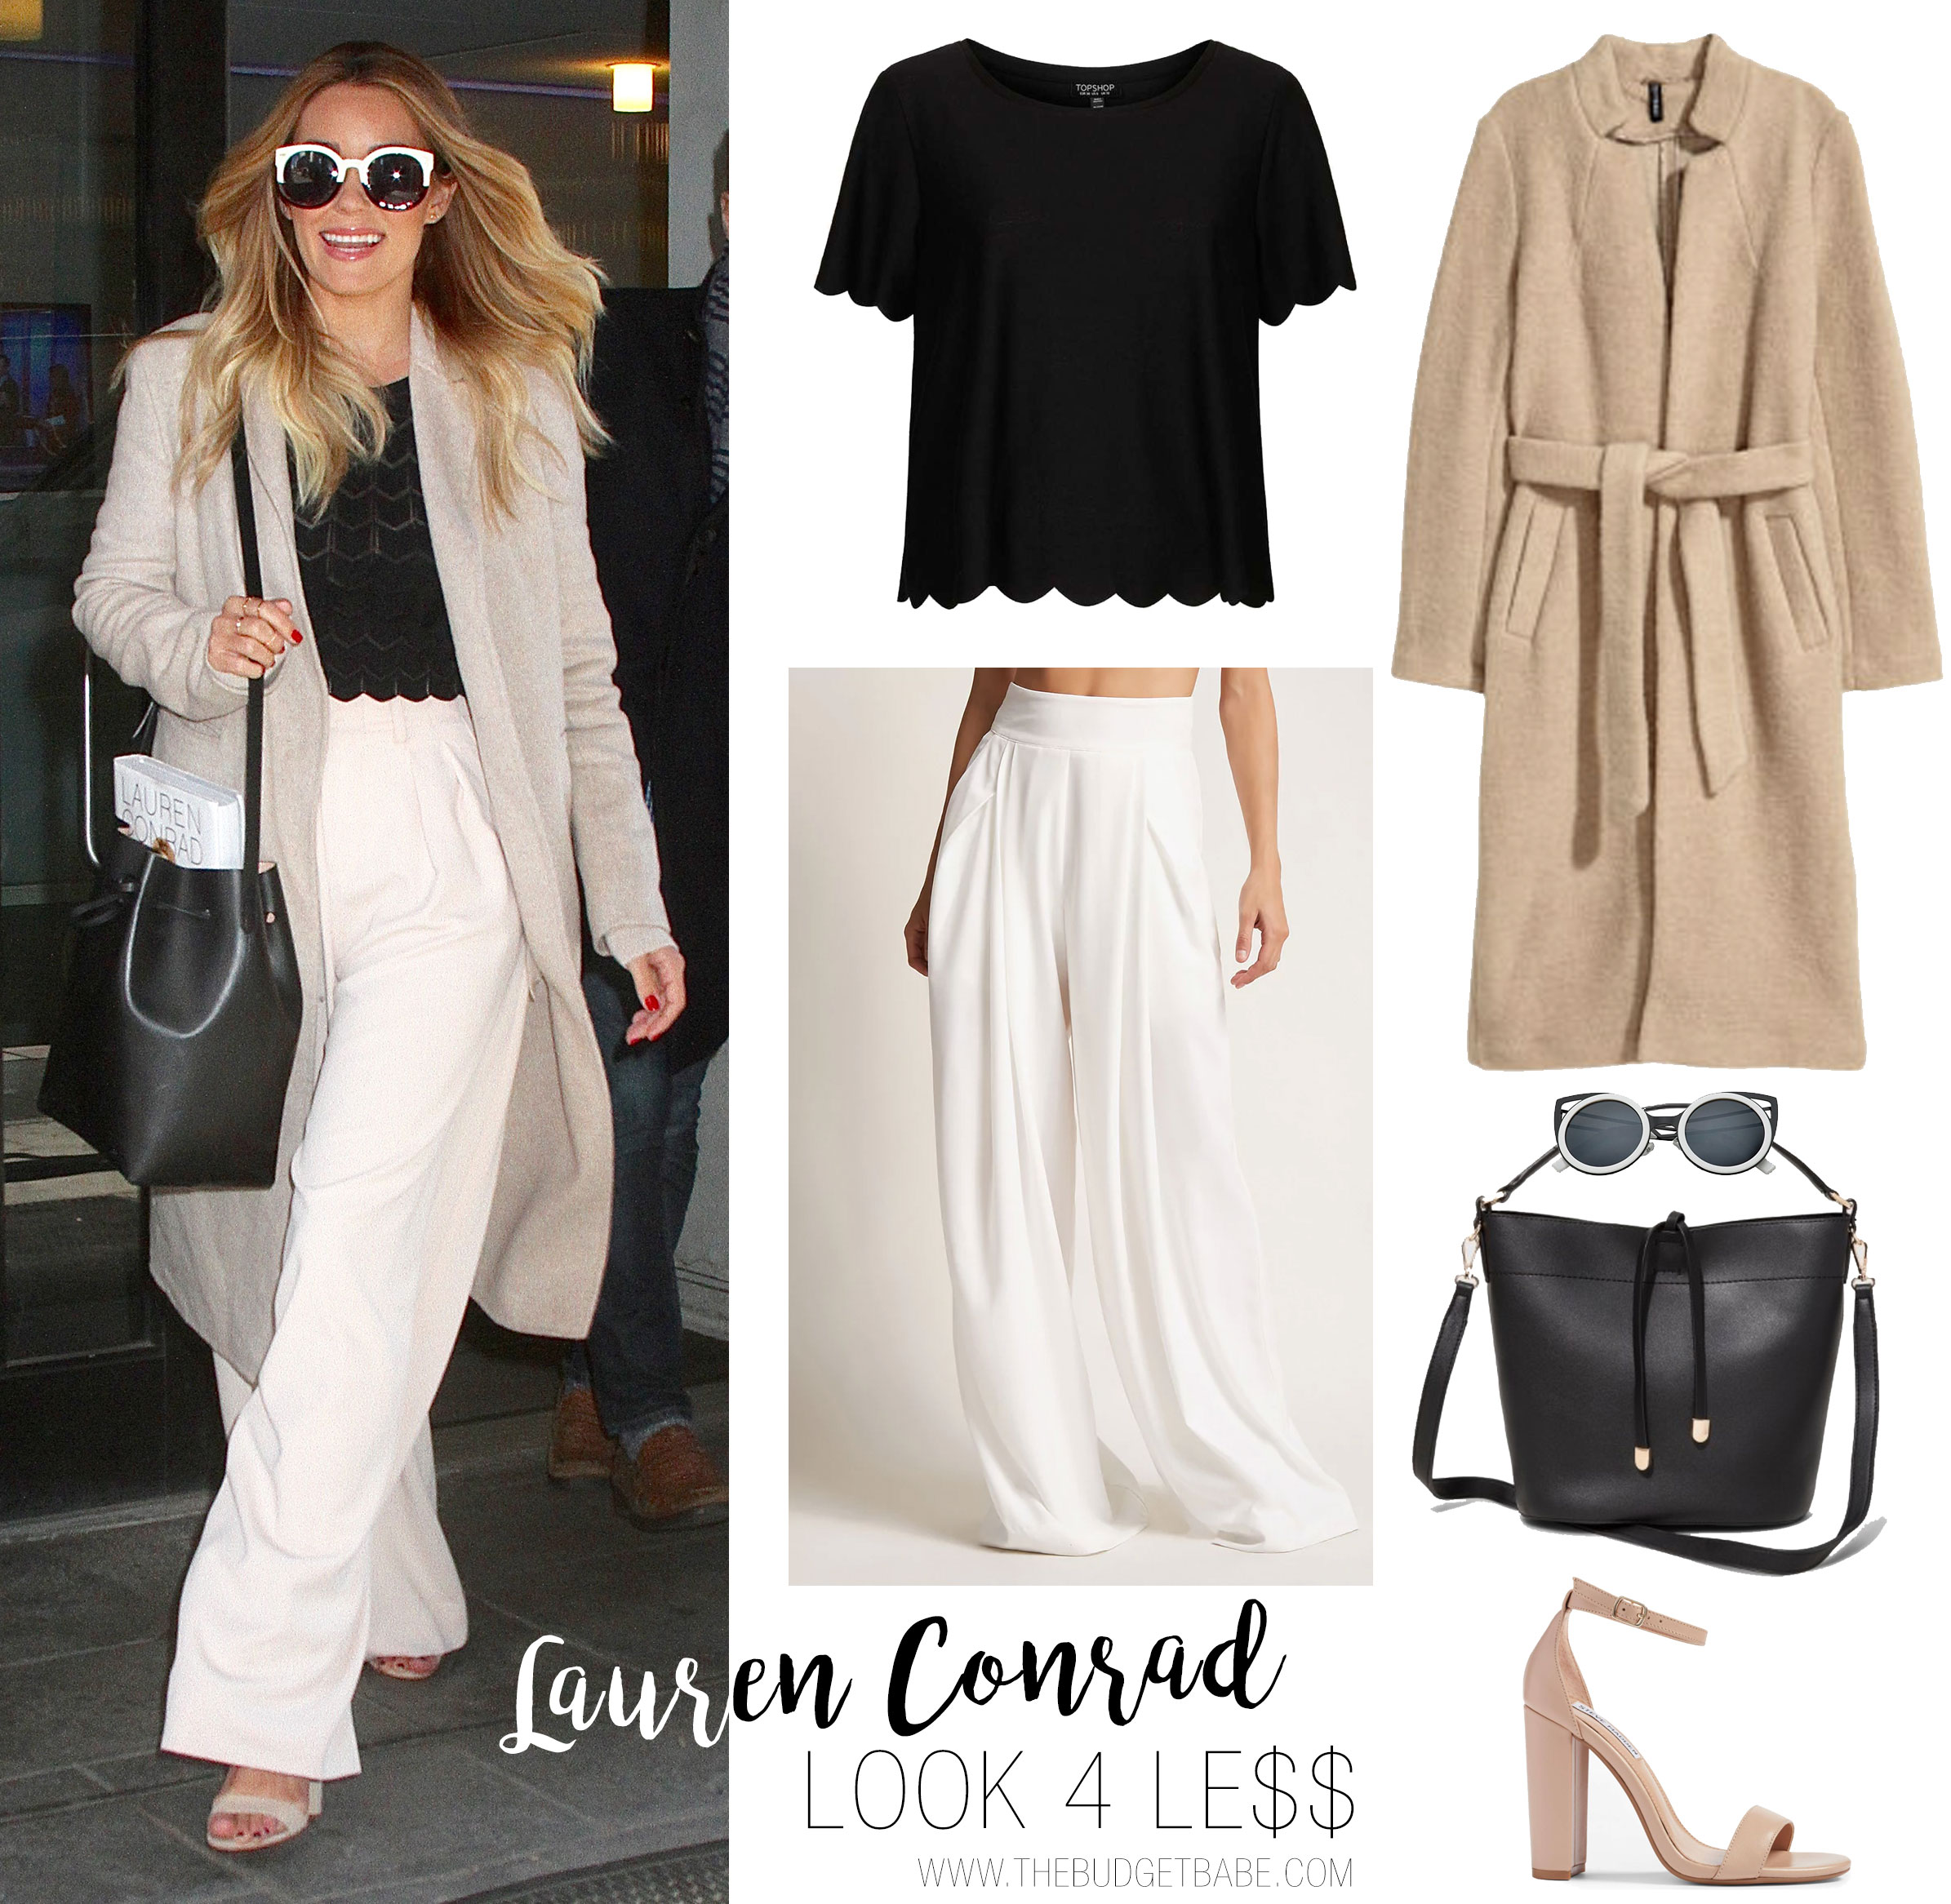 Get Lauren Conrad's chic white wide leg pants and black scalloped top look for yourself with these budget-friendly finds.